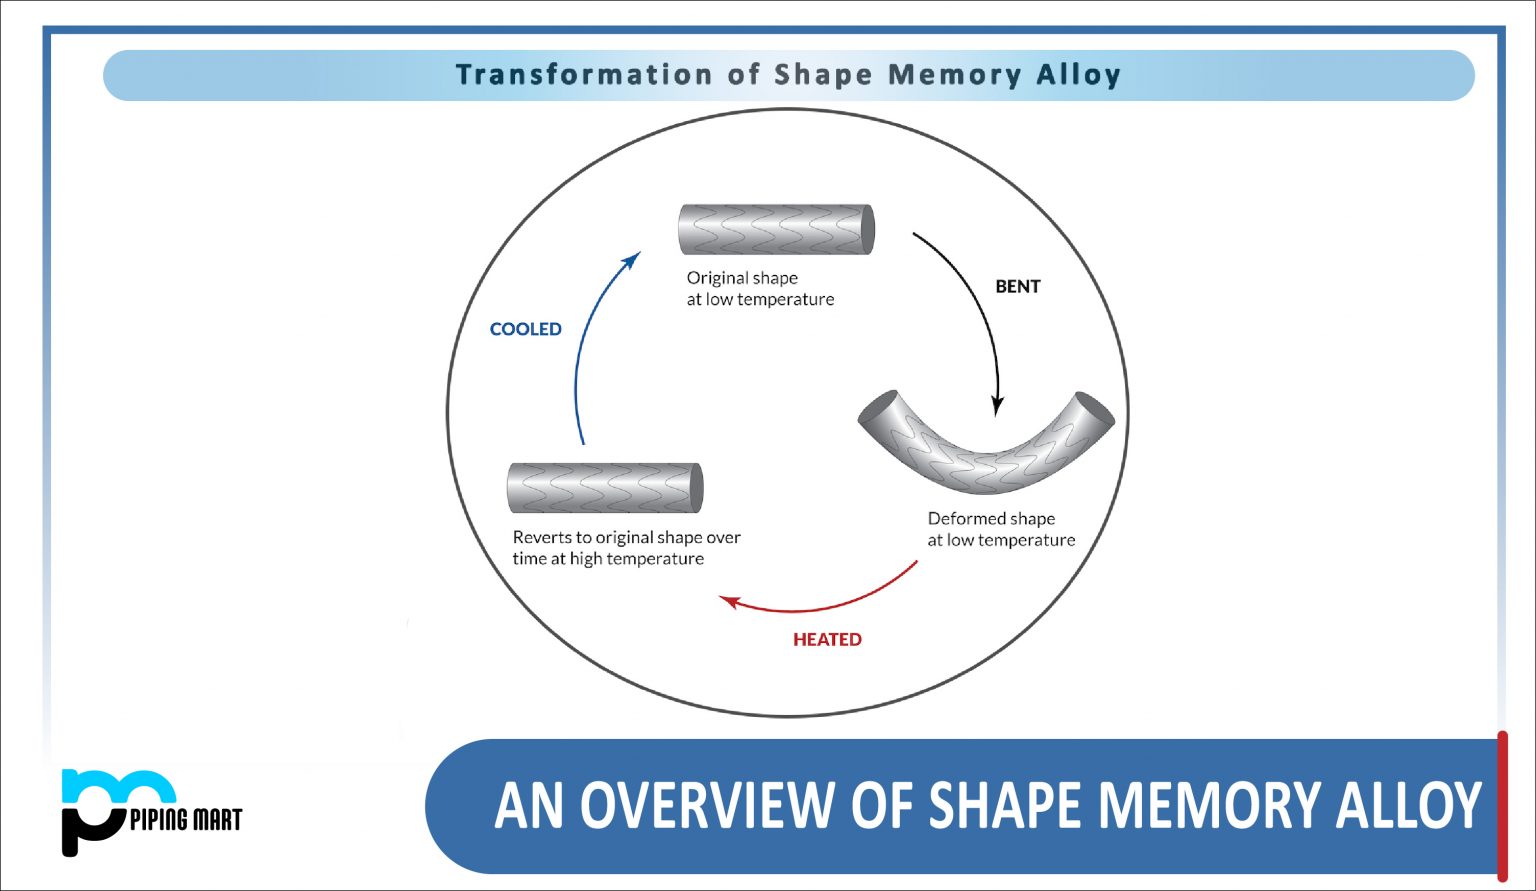 phd thesis on shape memory alloy